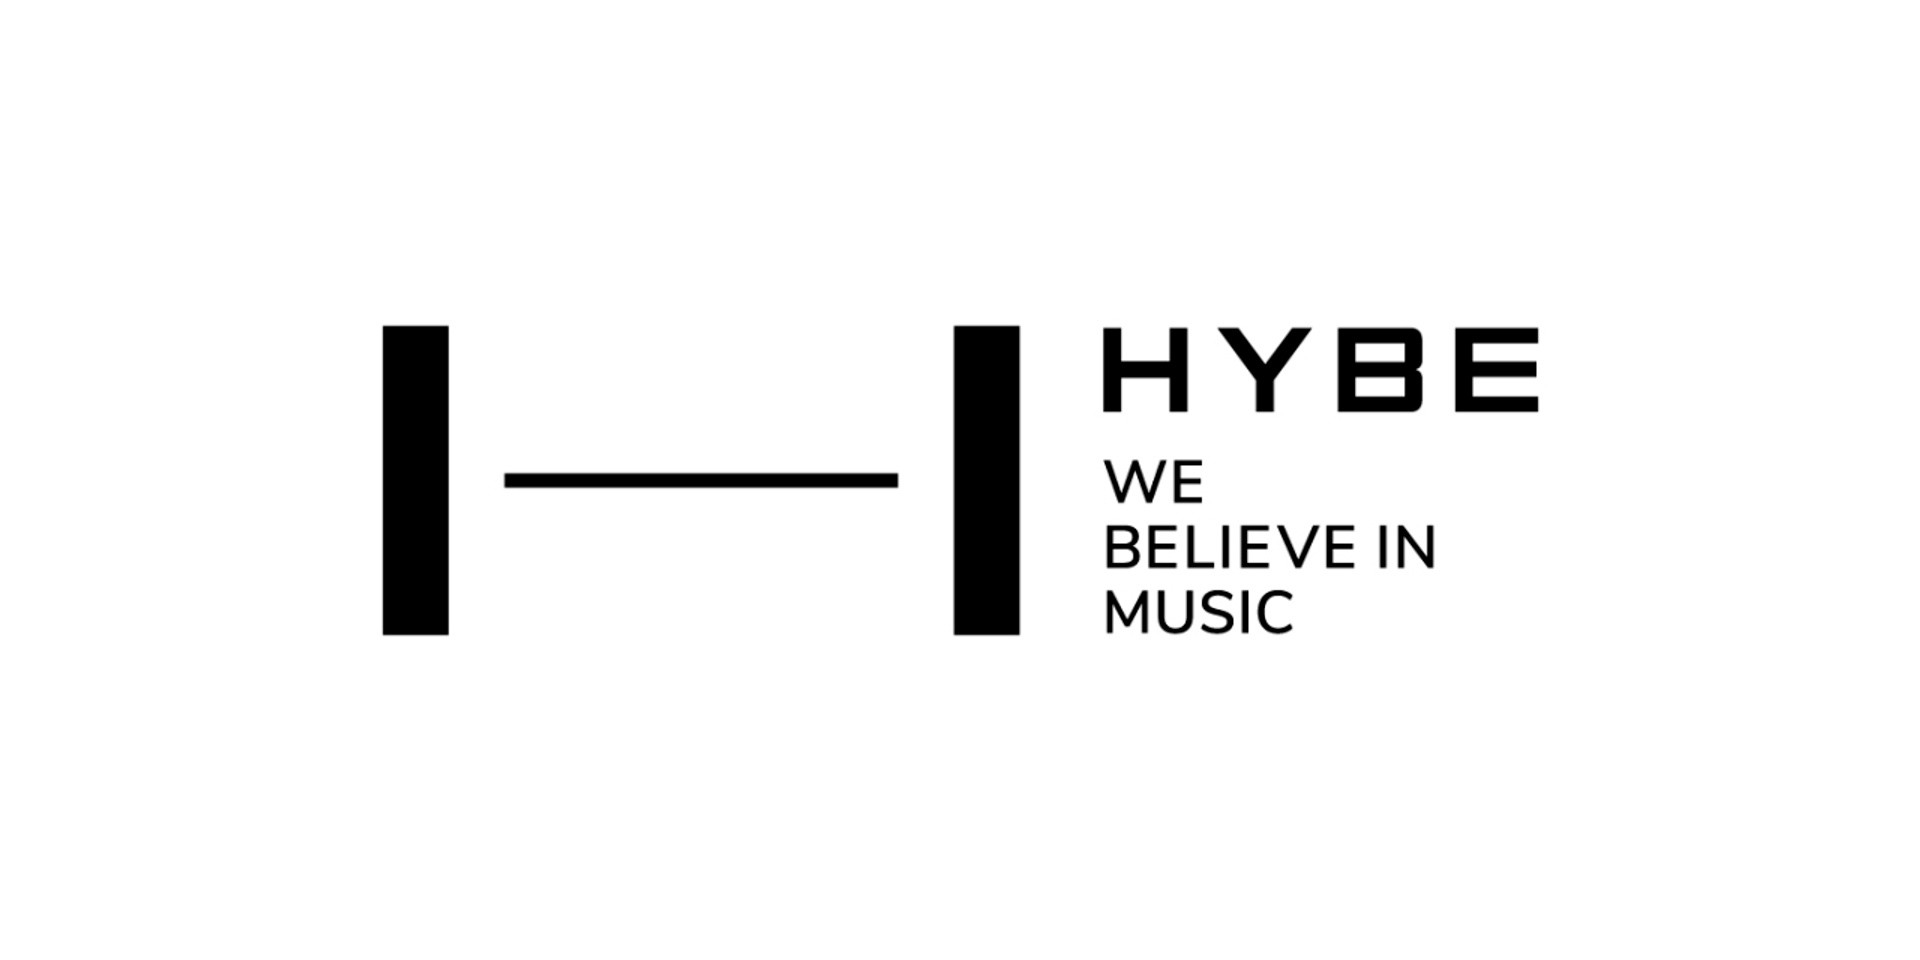 HYBE reports all-time record high quarterly revenue of KRW 512 million – BTS, SEVENTEEN, TXT, and ENHYPEN album sales, LE SSERAFIM and NewJeans debuts, and more